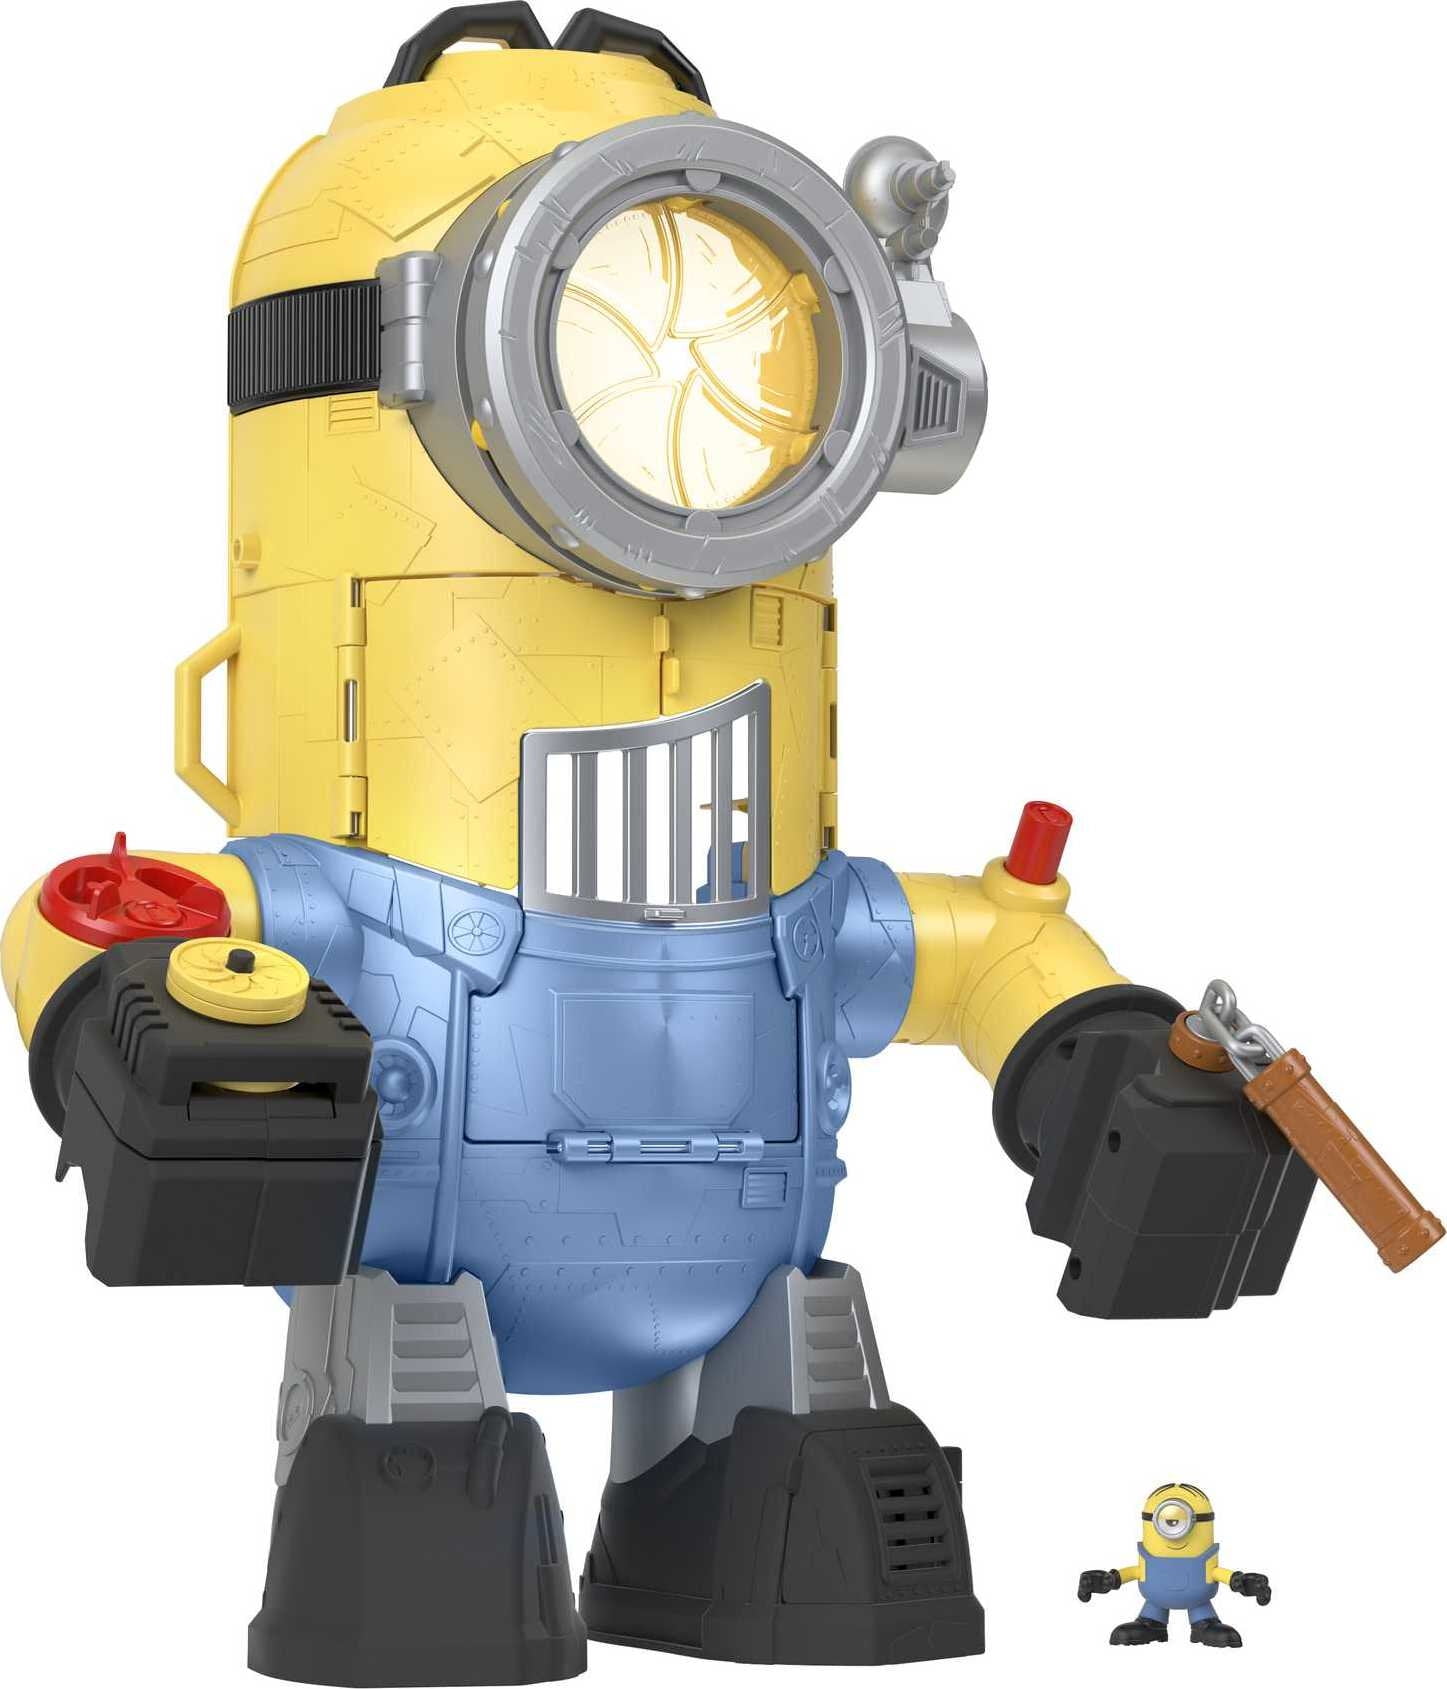 Imaginext Minions The Rise of Gru Rocket Bike & 7 Different Extra Figures for sale online 